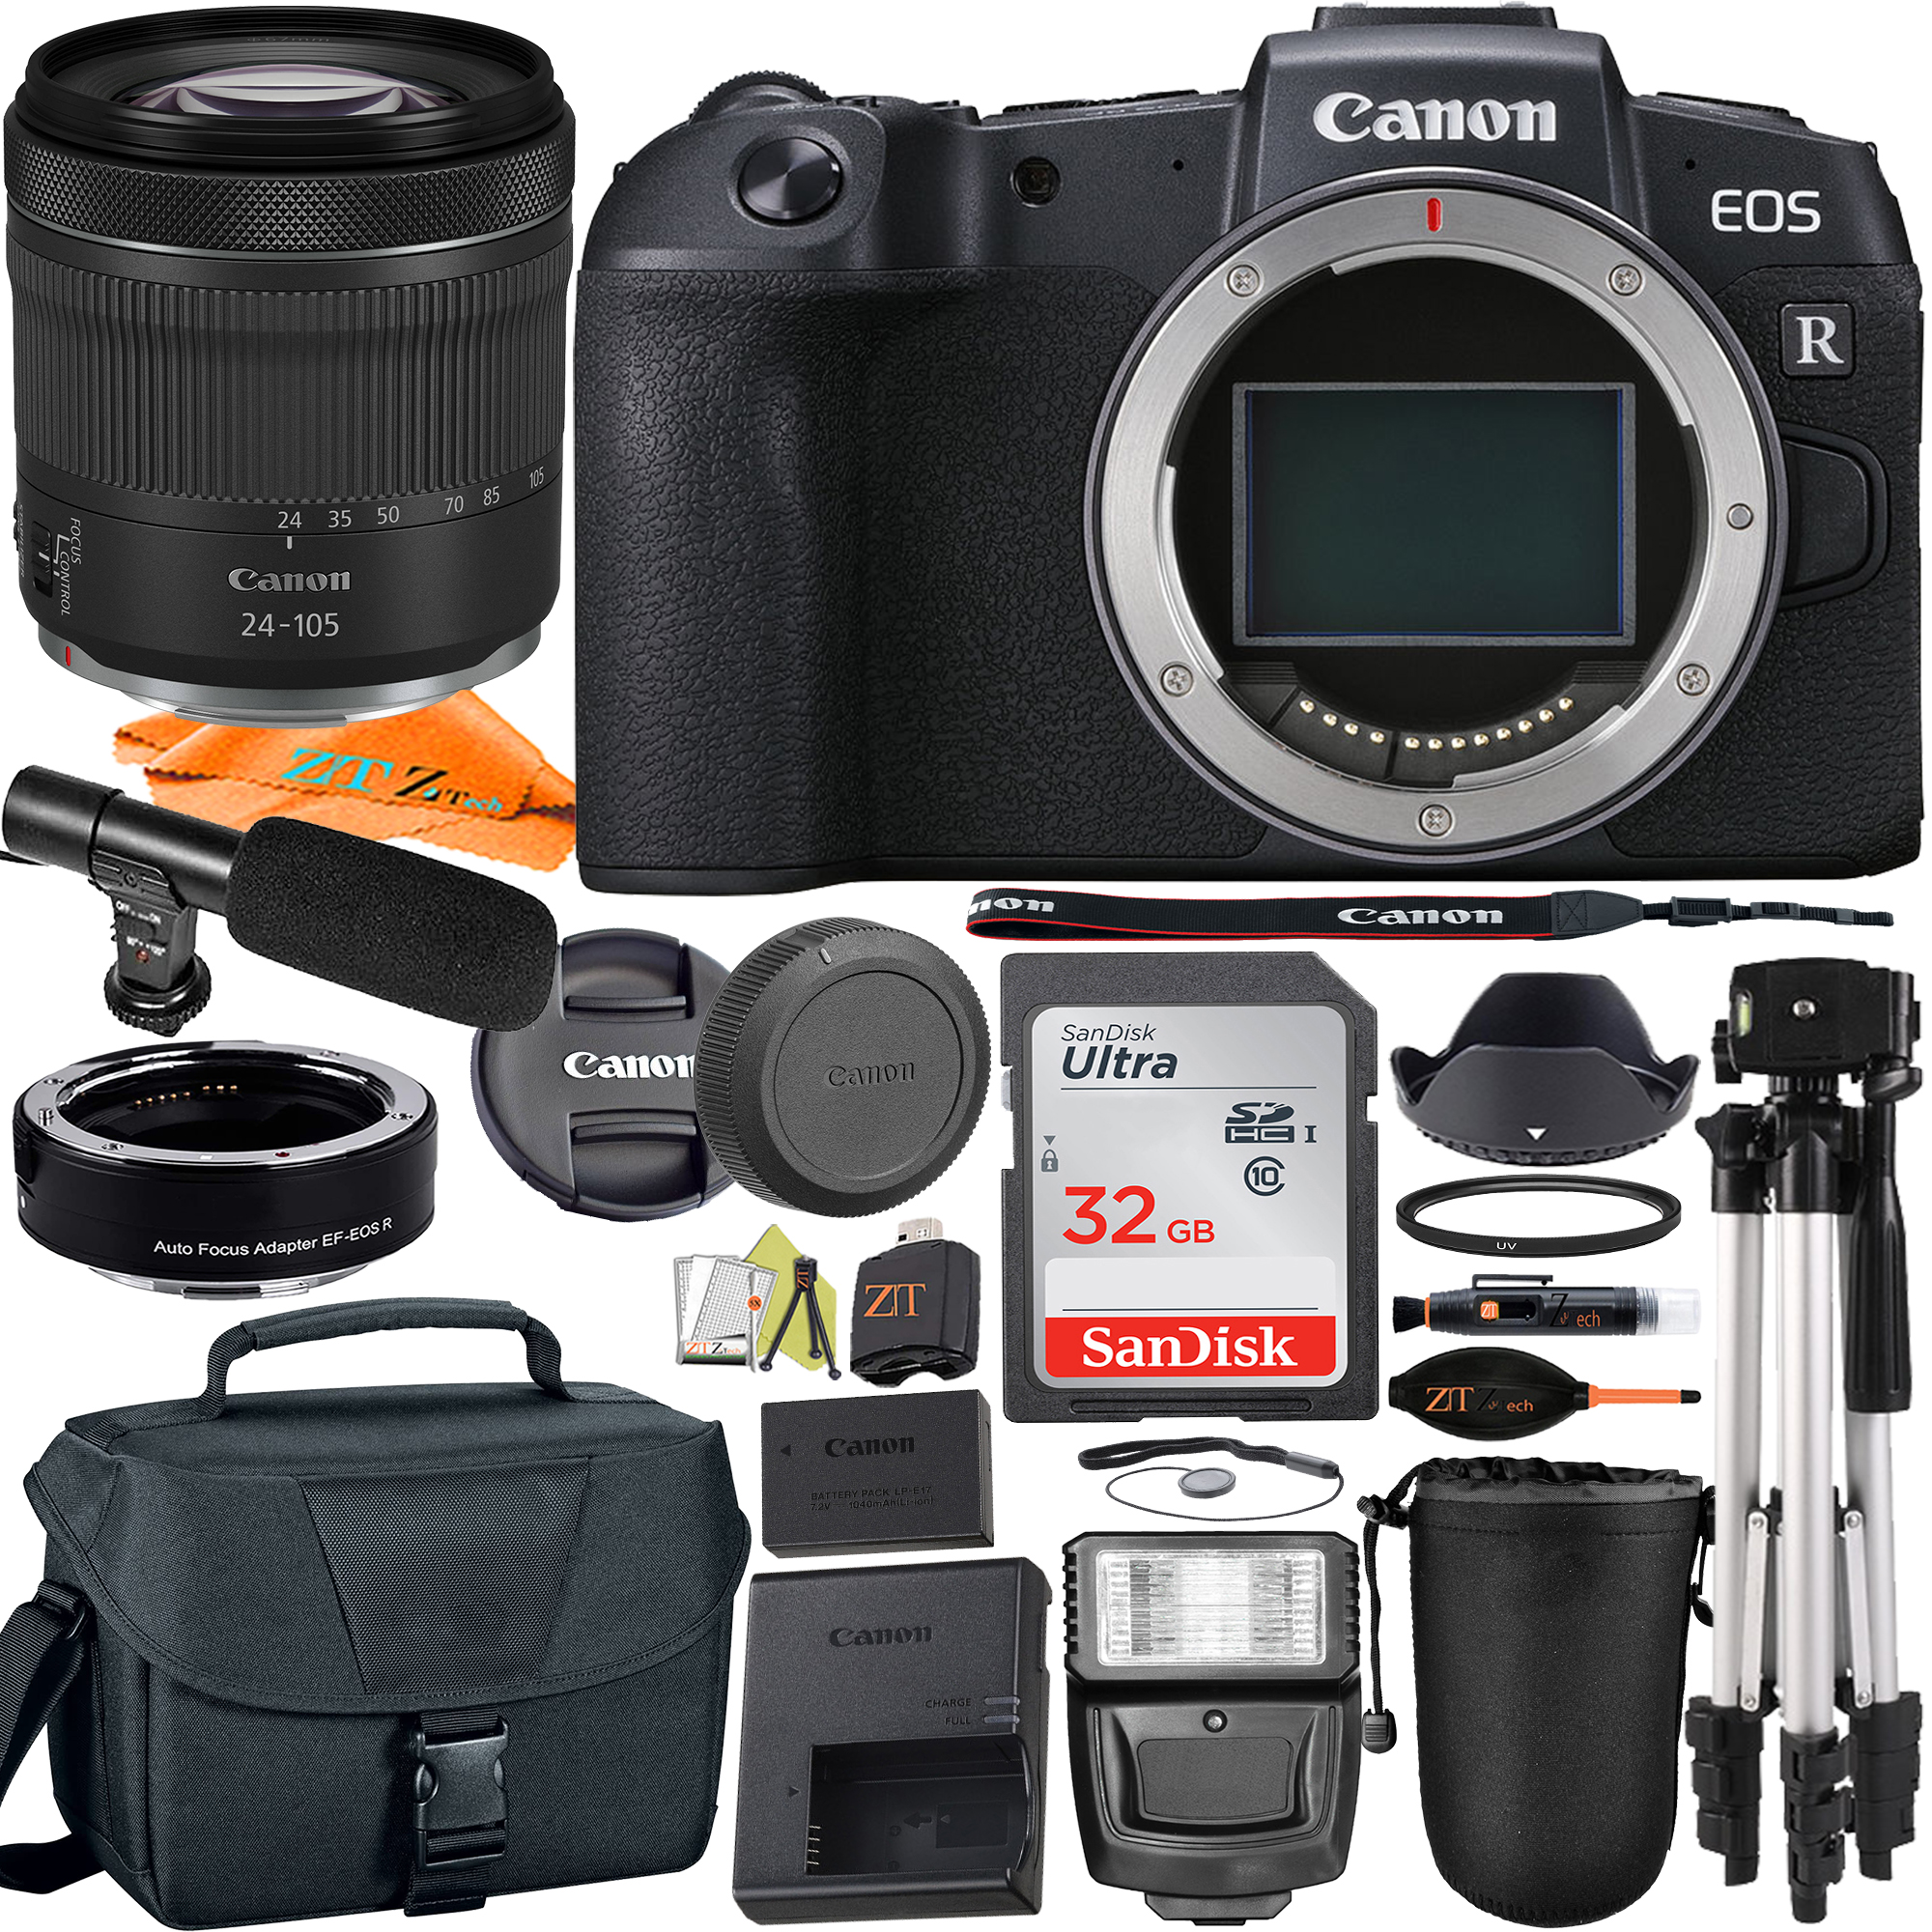 Canon EOS RP Mirrorless Digital Camera with RF24-105mm Lens + Mount Adapter + SanDisk 32GB + ZeeTech Accessory Bundle